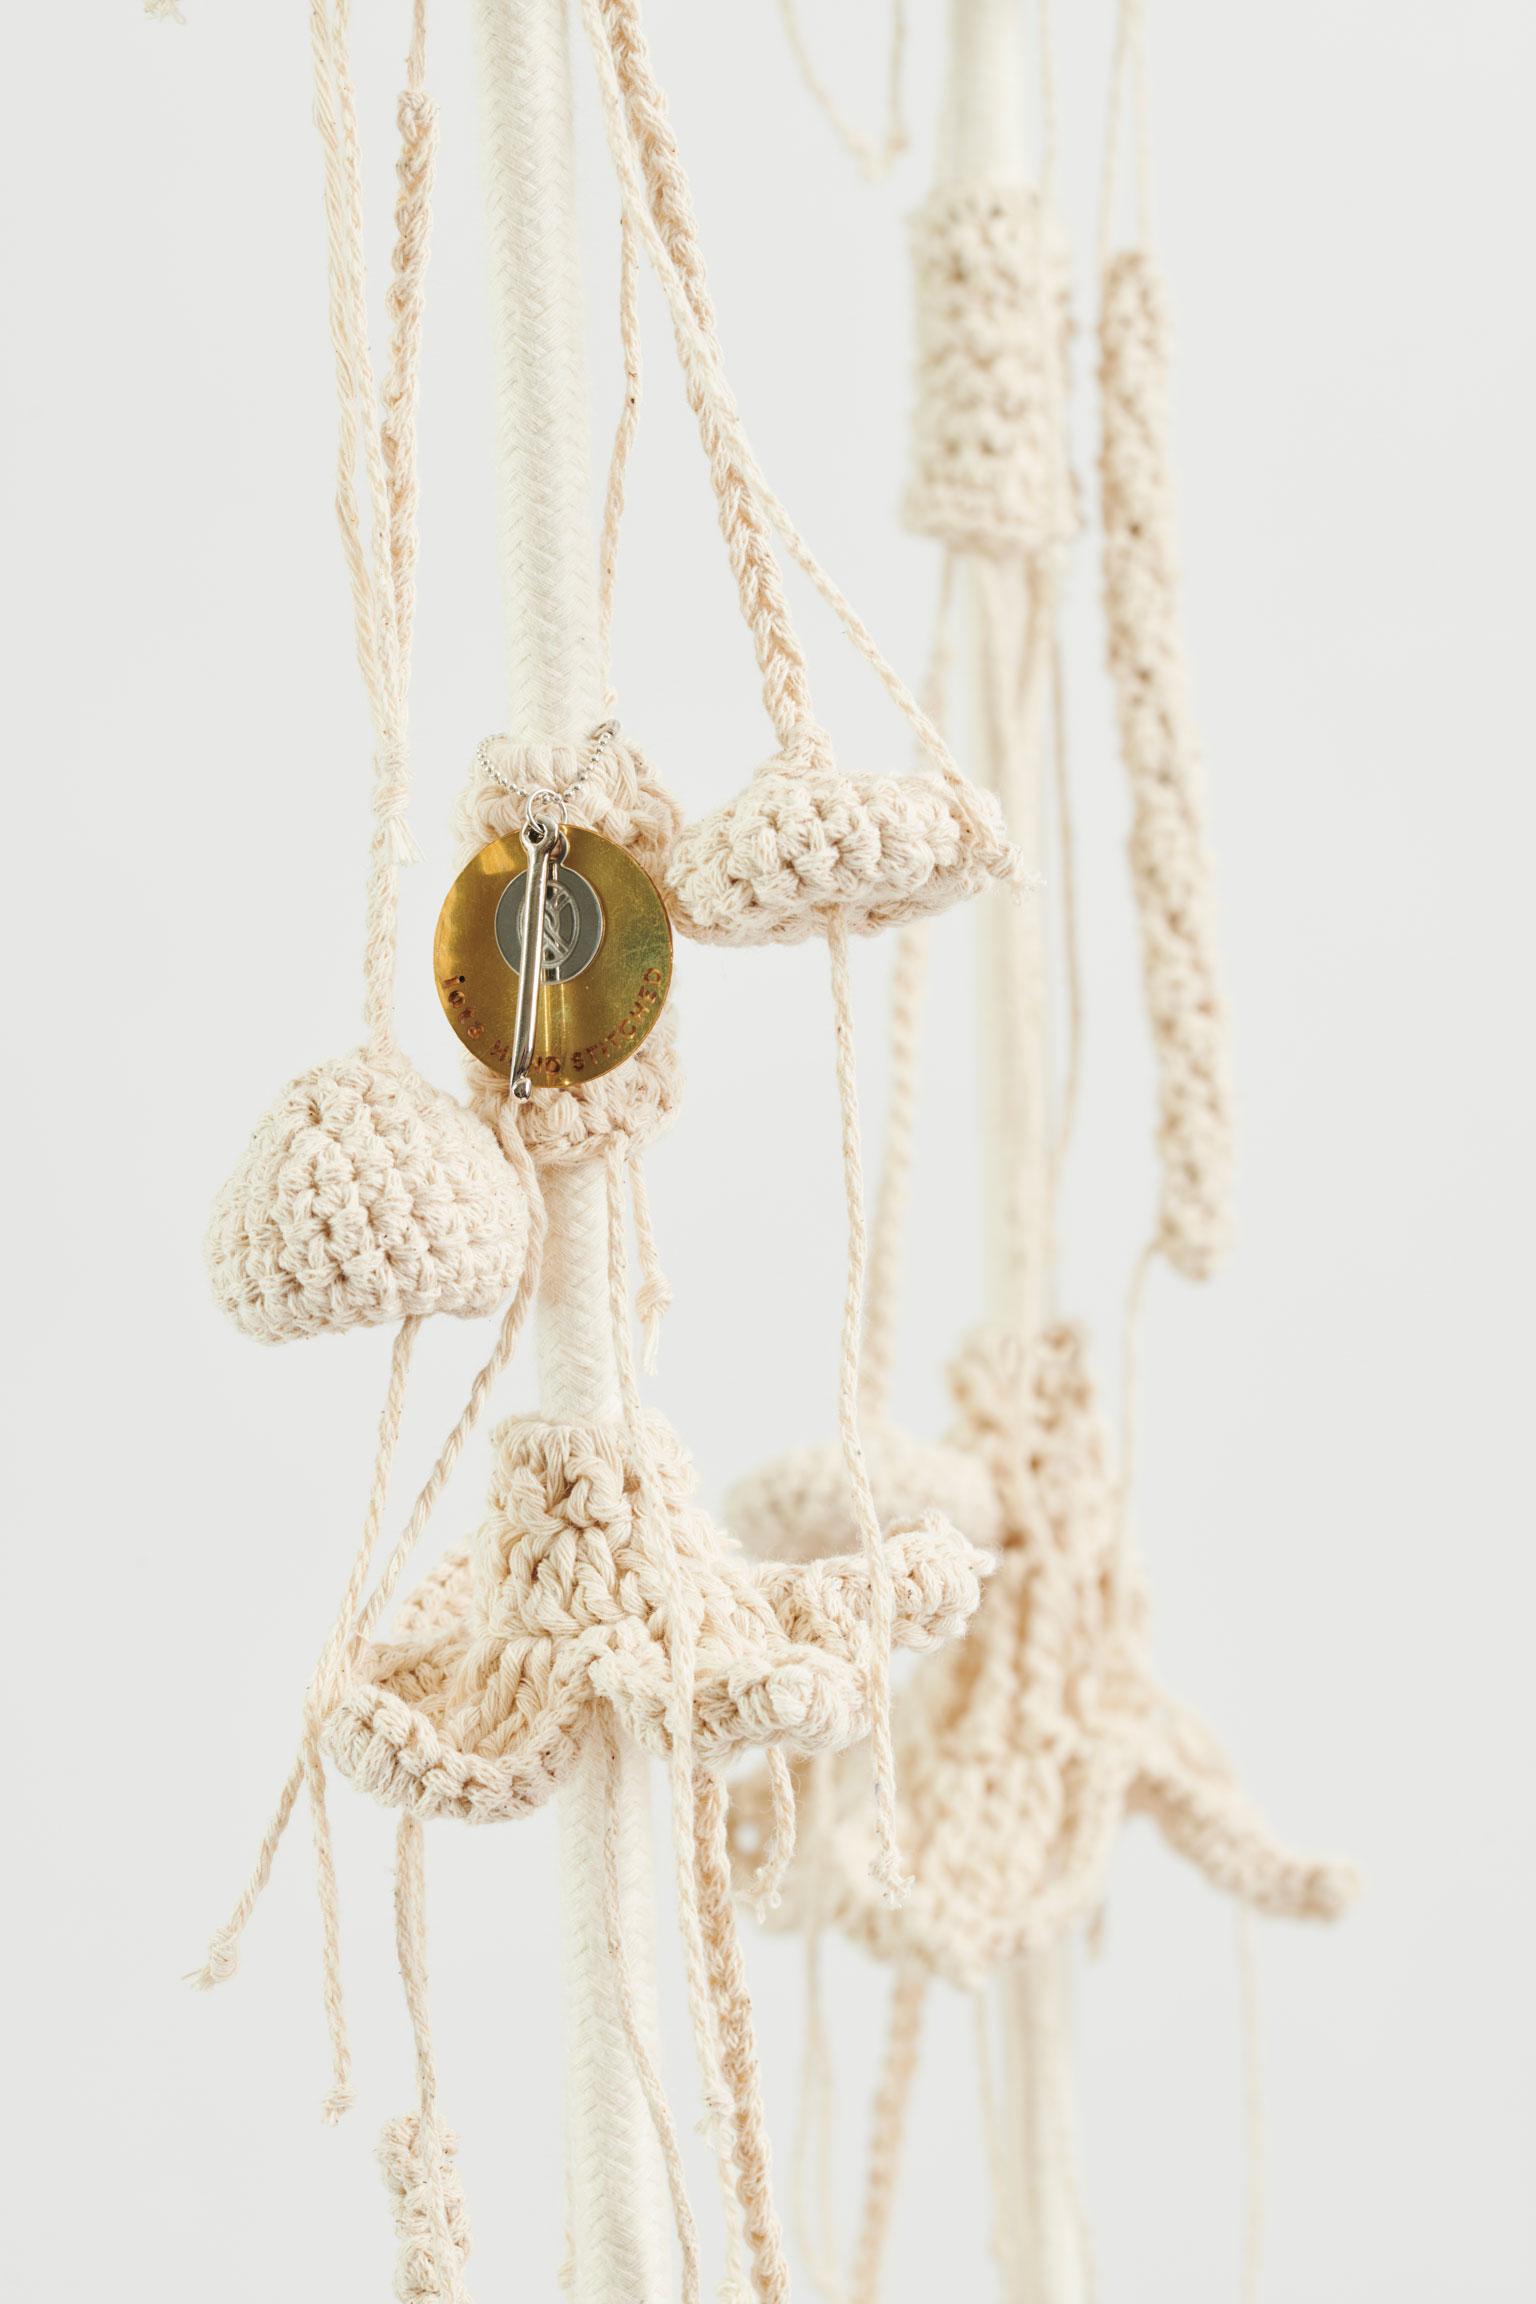 The iota desert swing, influenced by desert aesthetics, takes the user to a wild, natural, fantastic place. The swing showcases much of our special knitted hand work. The numerous intricate elements that form the swing are hand knit with bespoke